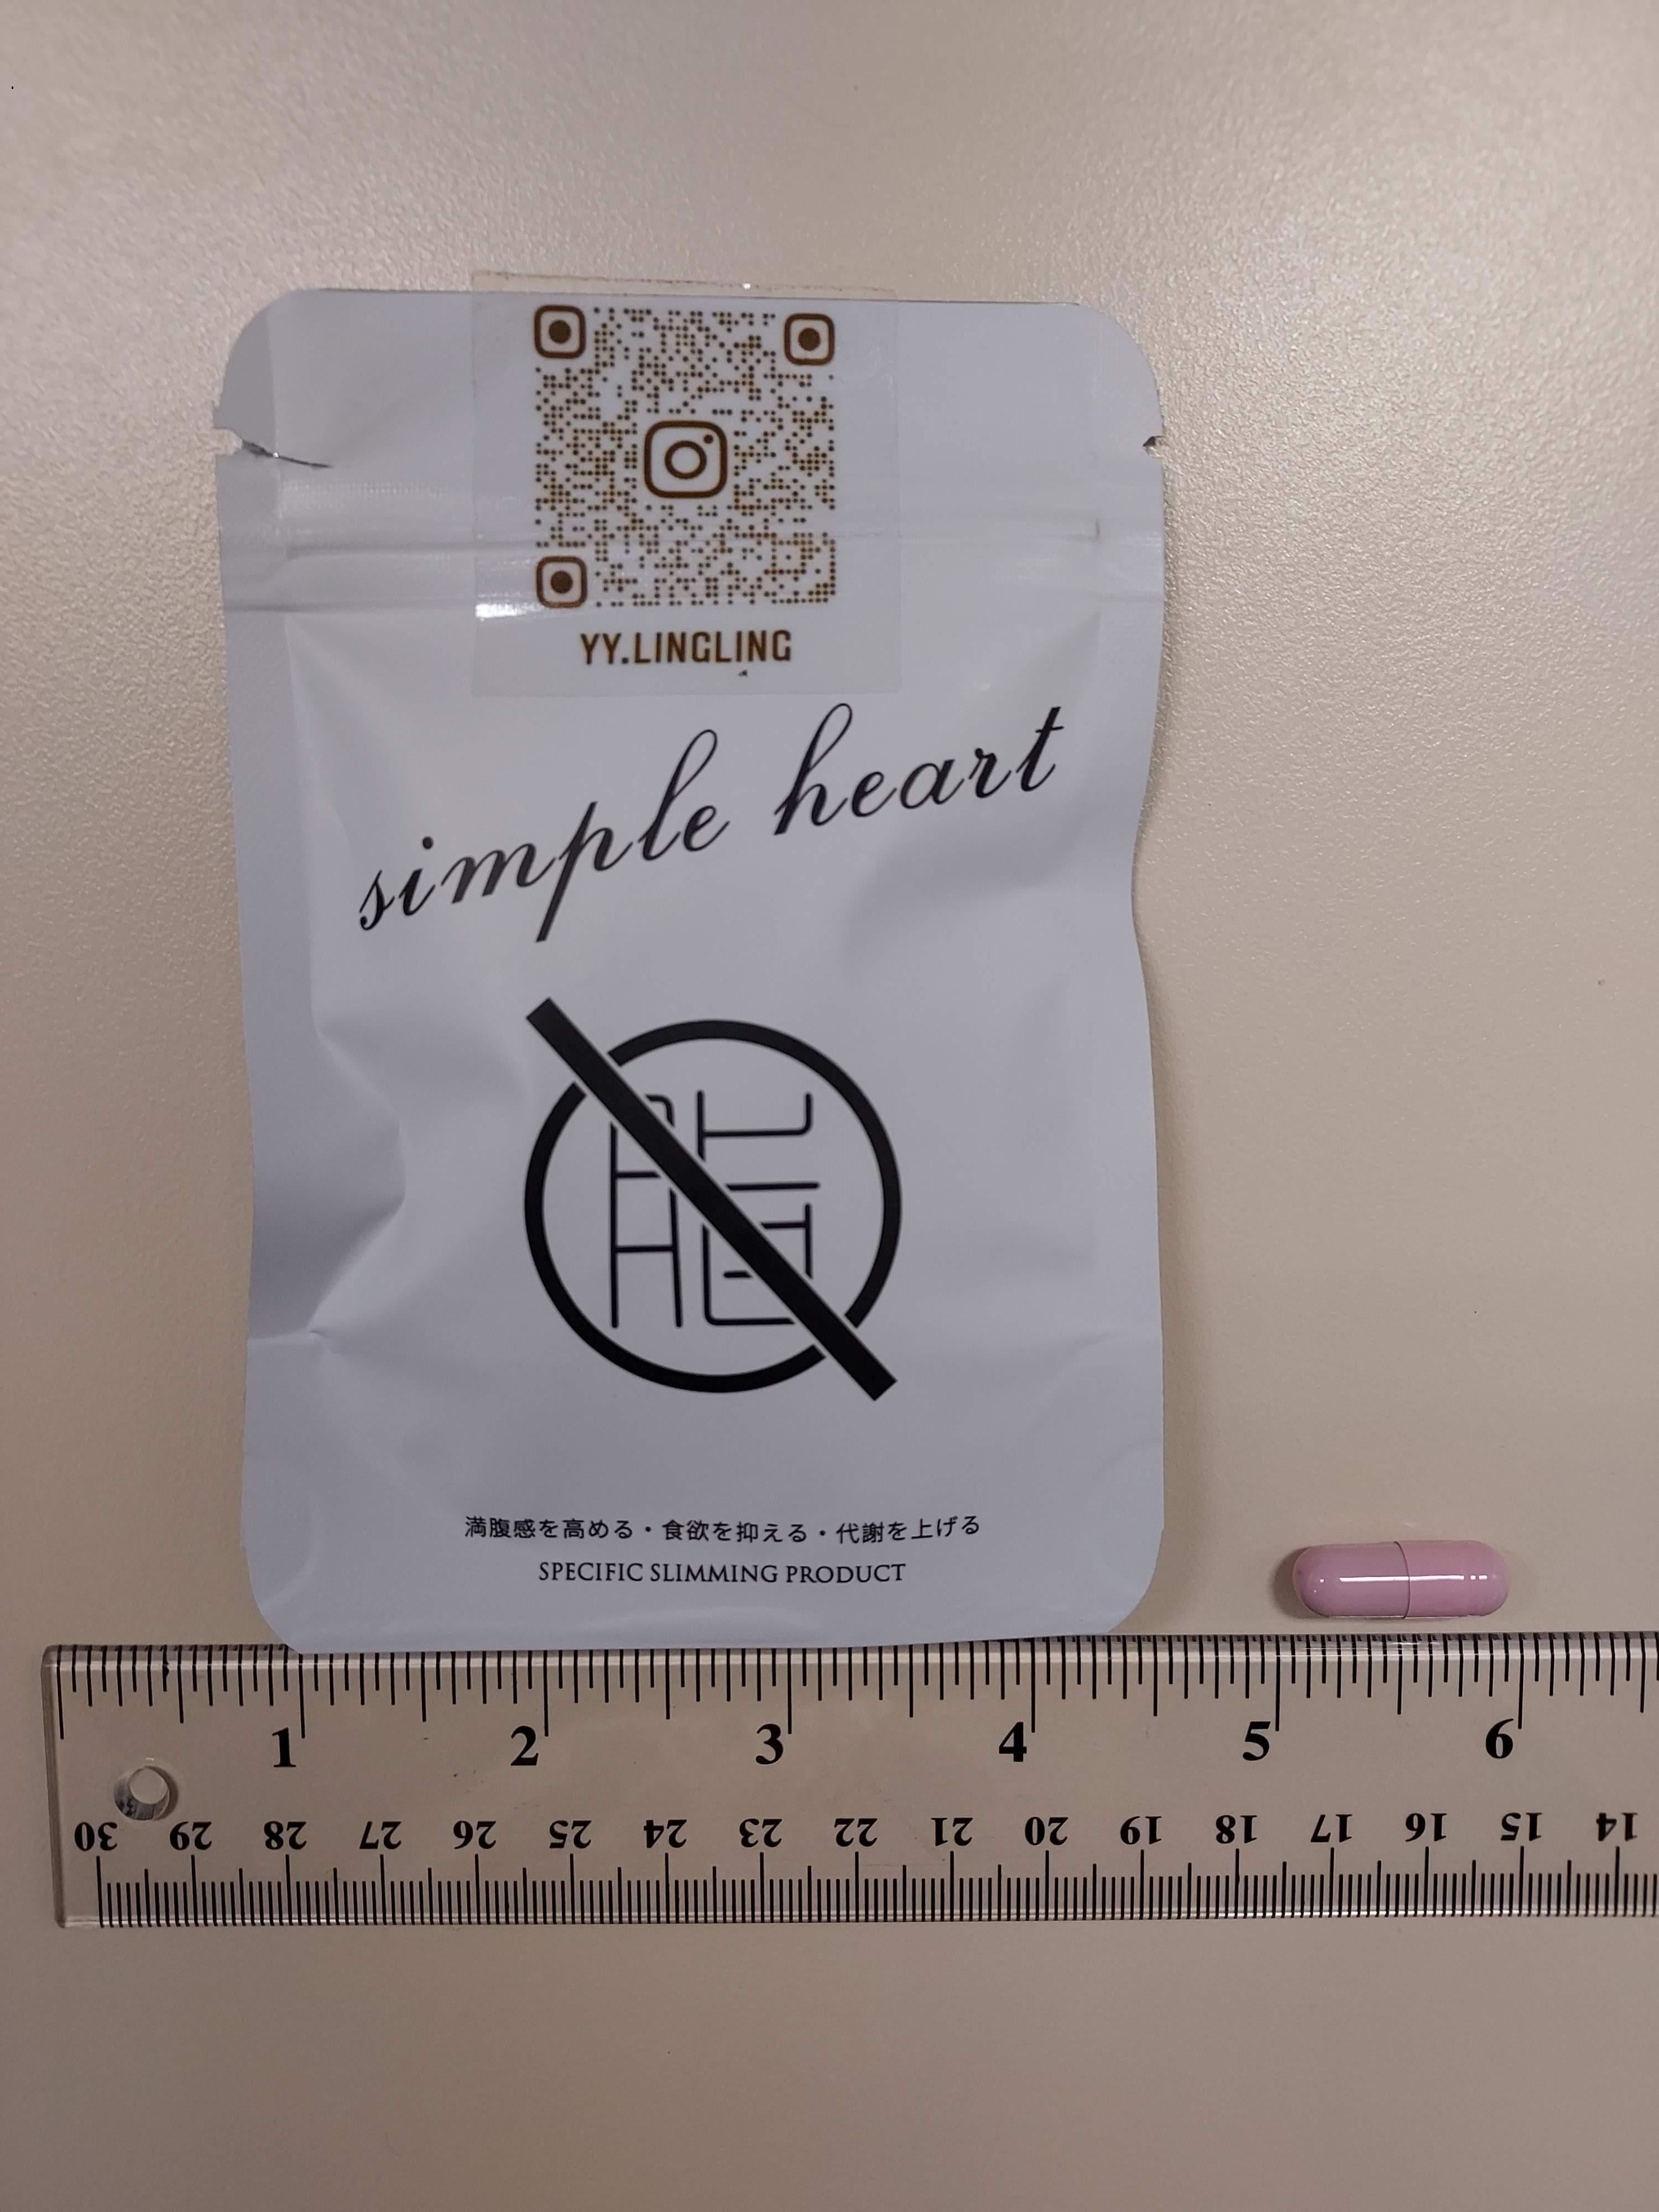 The Department of Health (DH) today (December 8) appealed to the public not to buy or consume a slimming product, namely "simple heart SPECIFIC SLIMMING PRODUCT", as it was found to contain undeclared controlled and banned drug ingredients. Photo shows the aforementioned slimming product.